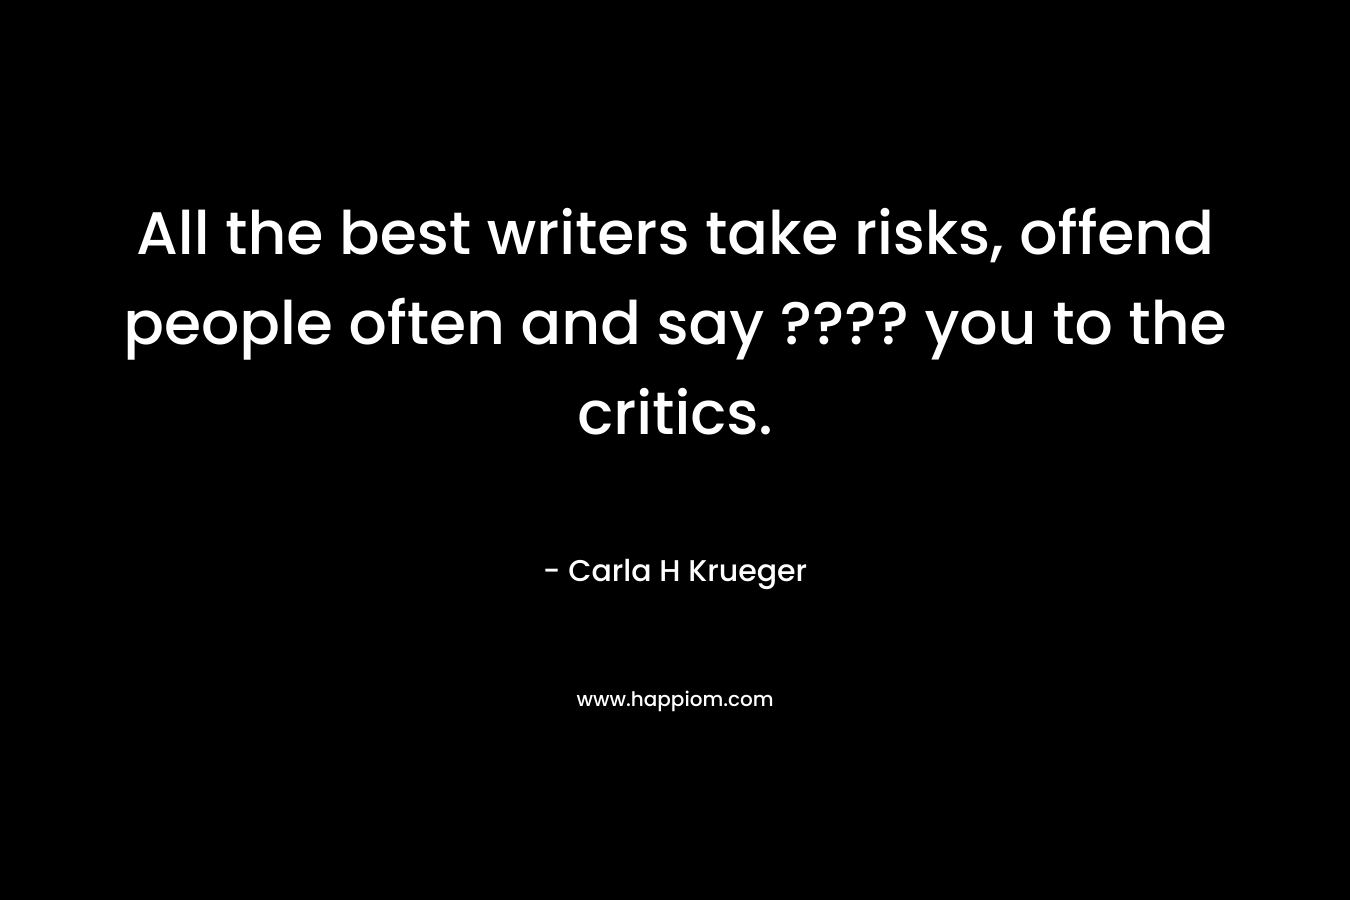 All the best writers take risks, offend people often and say ???? you to the critics. – Carla H Krueger